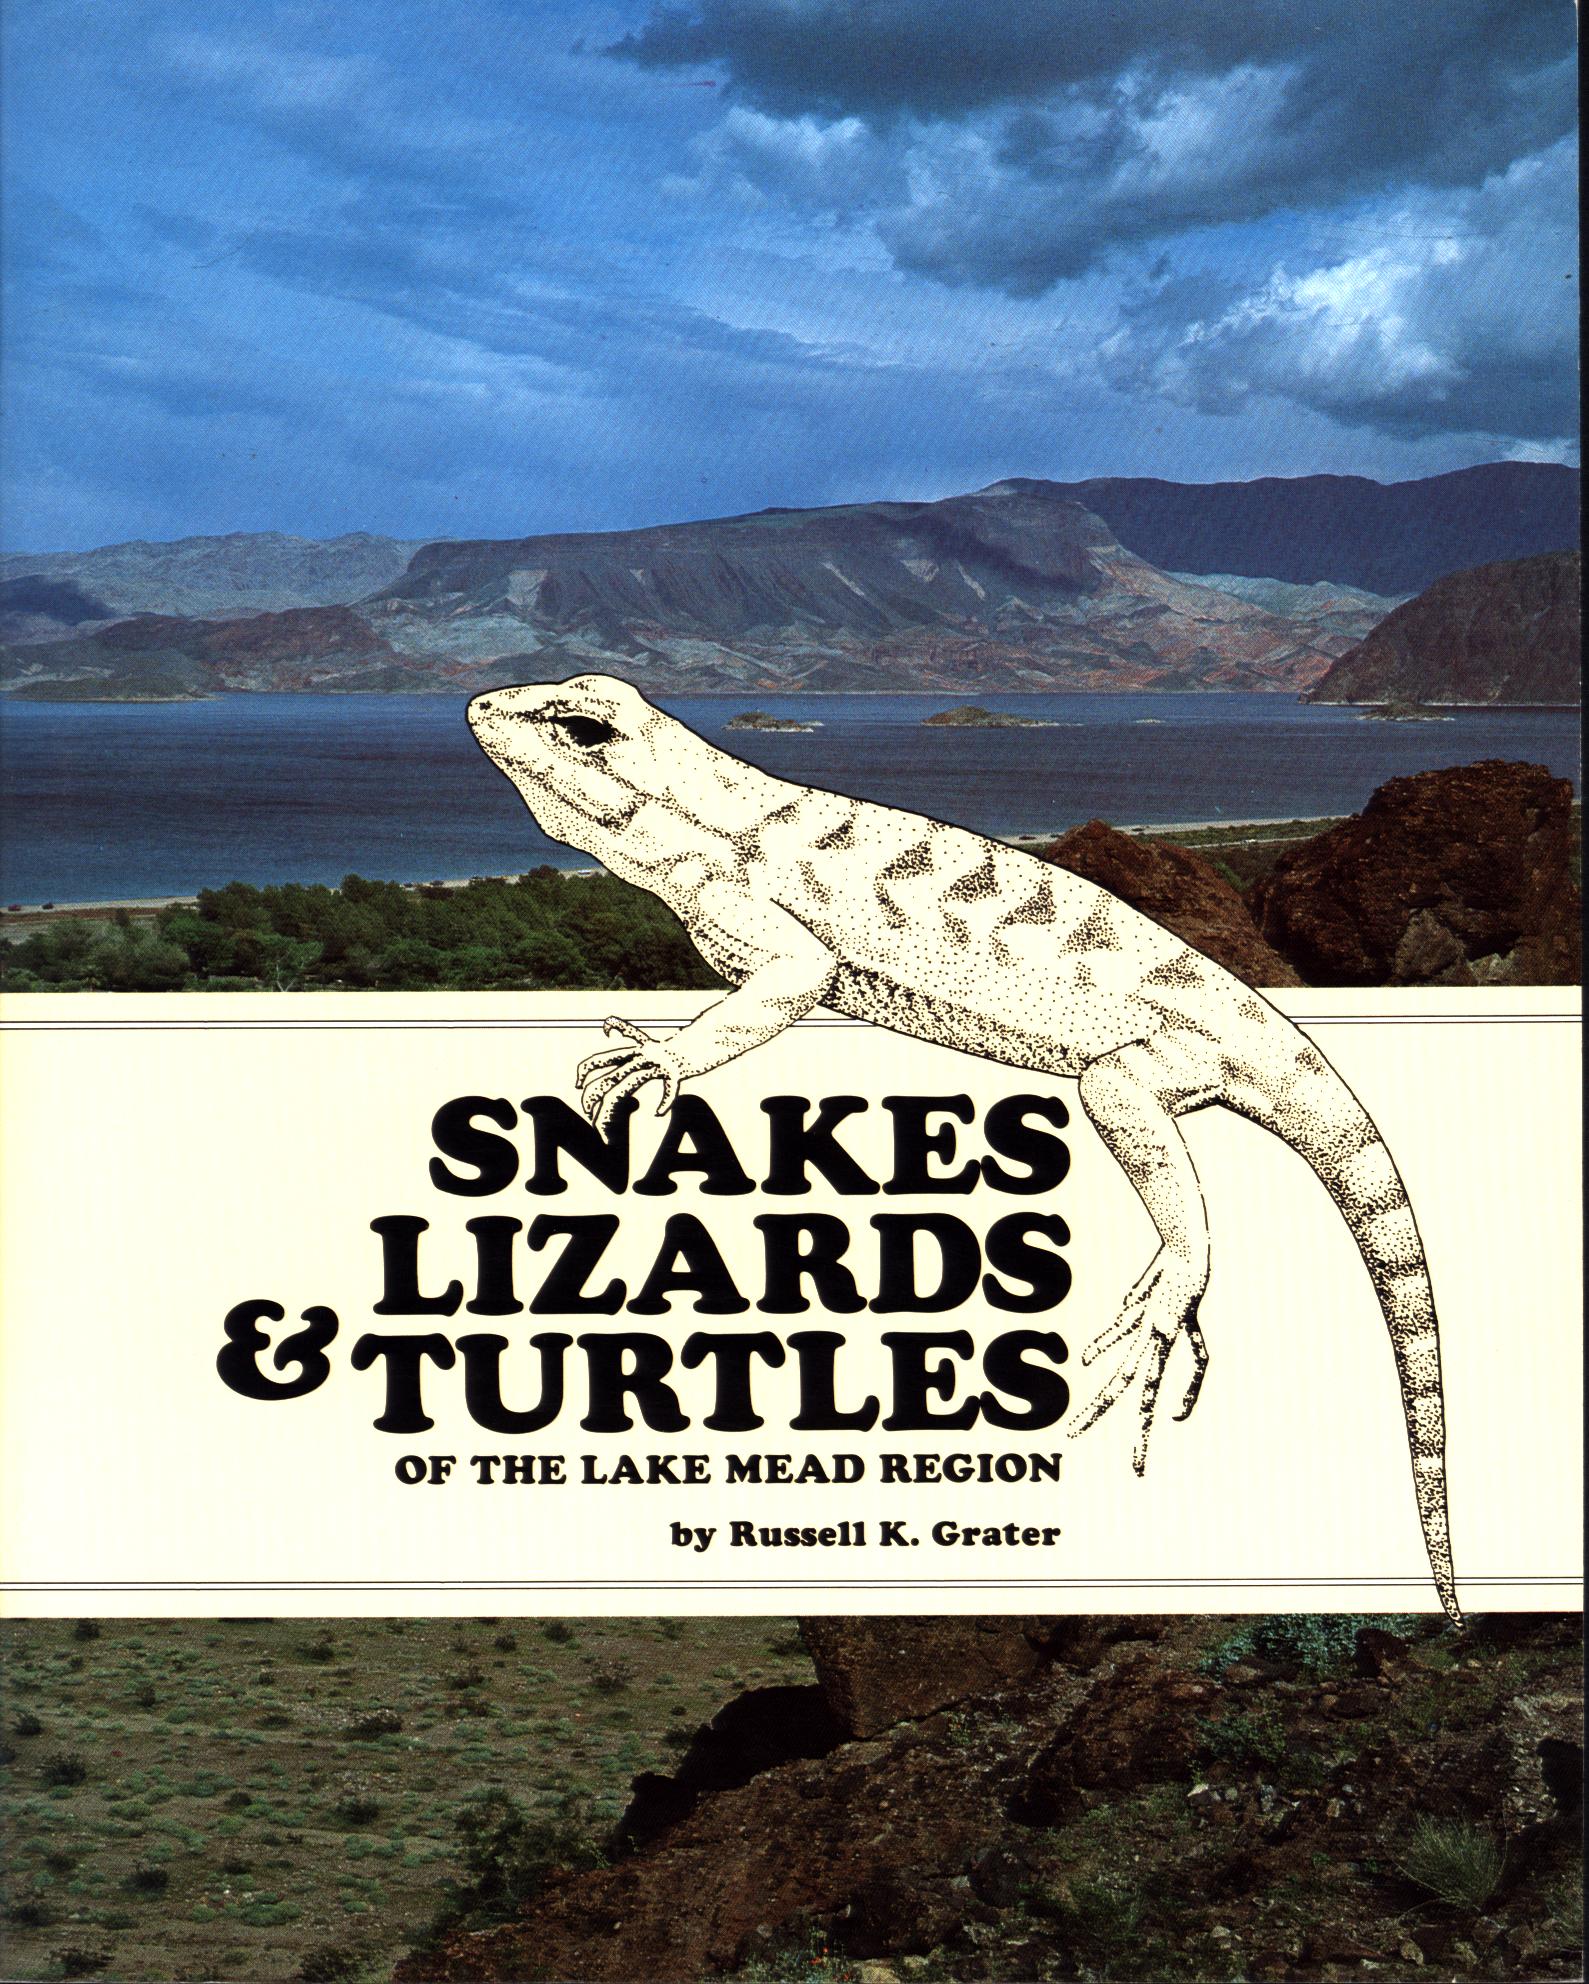 SNAKES, TURTLES, & LIZARDS OF THE LAKE MEAD REGION. 